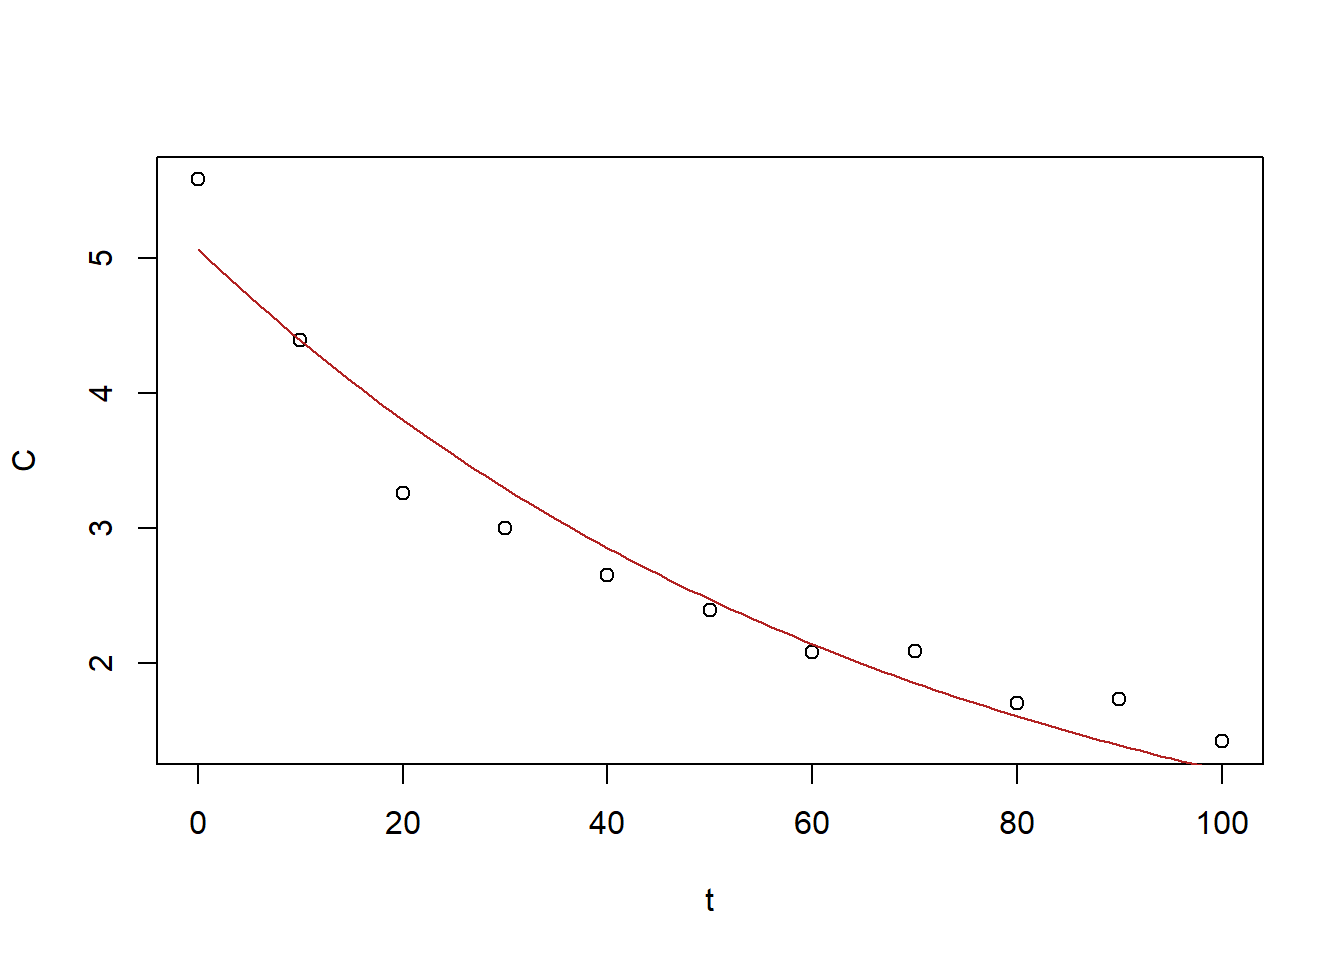 Fitted exponential line of best fit as the solution is superimposed.